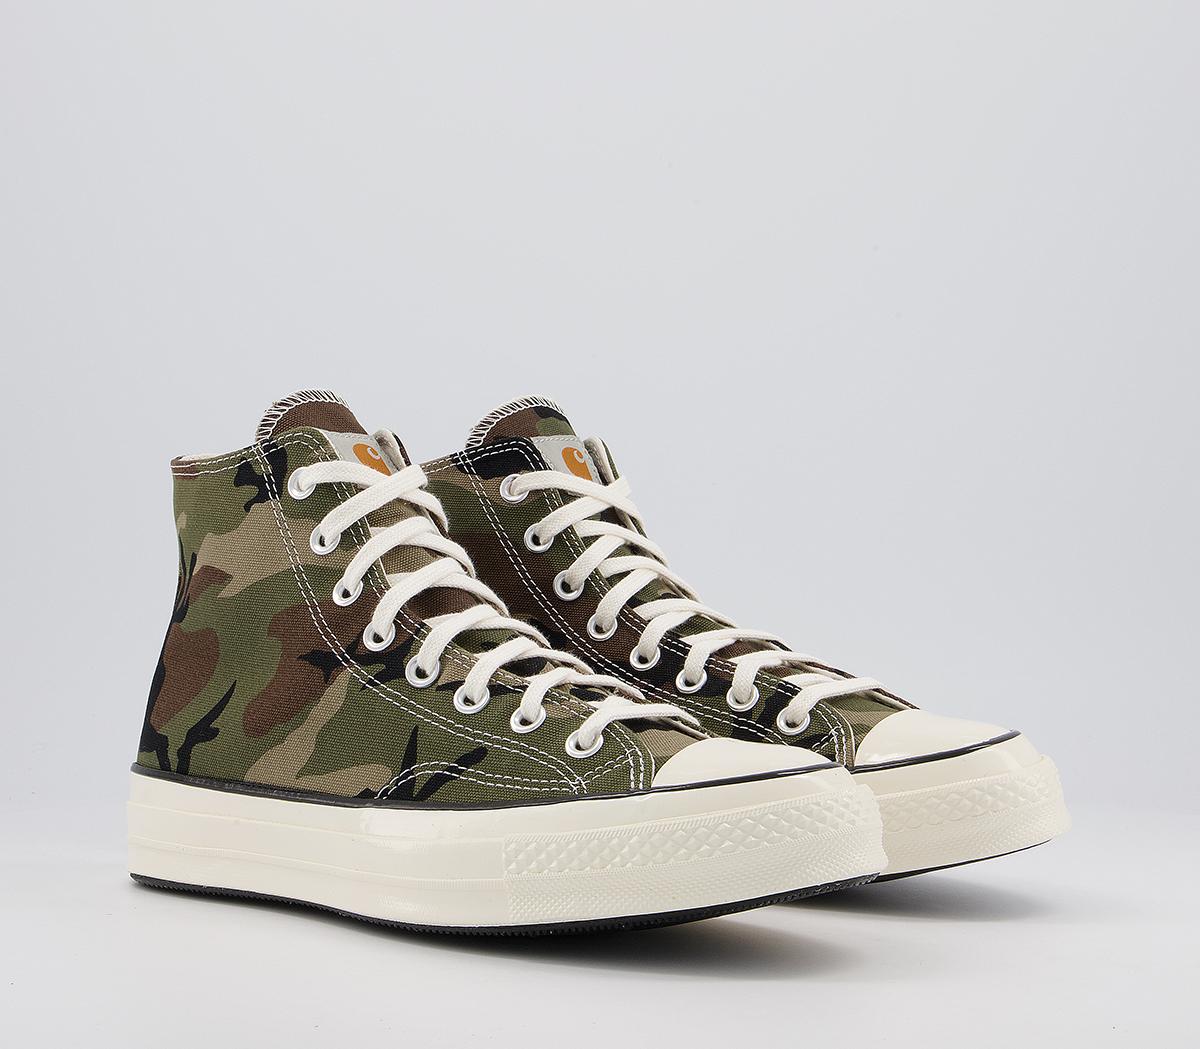 Converse All Star Hi 70s Trainers Carhartt Pale Putty - Unisex Sports